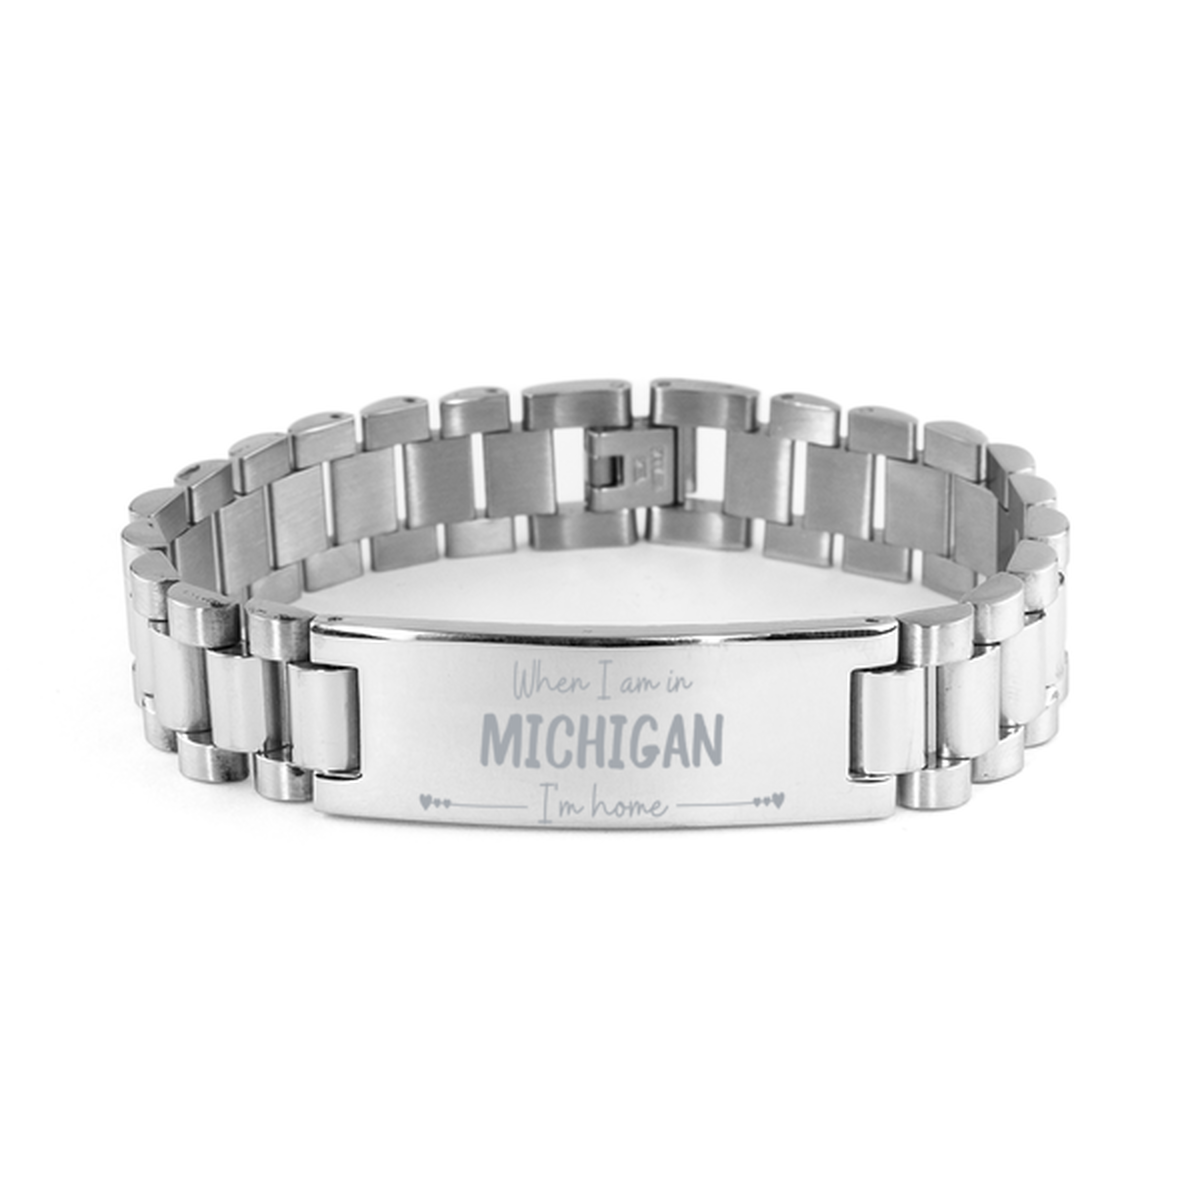 When I am in Michigan I'm home Ladder Stainless Steel Bracelet, Cheap Gifts For Michigan, State Michigan Birthday Gifts for Friends Coworker